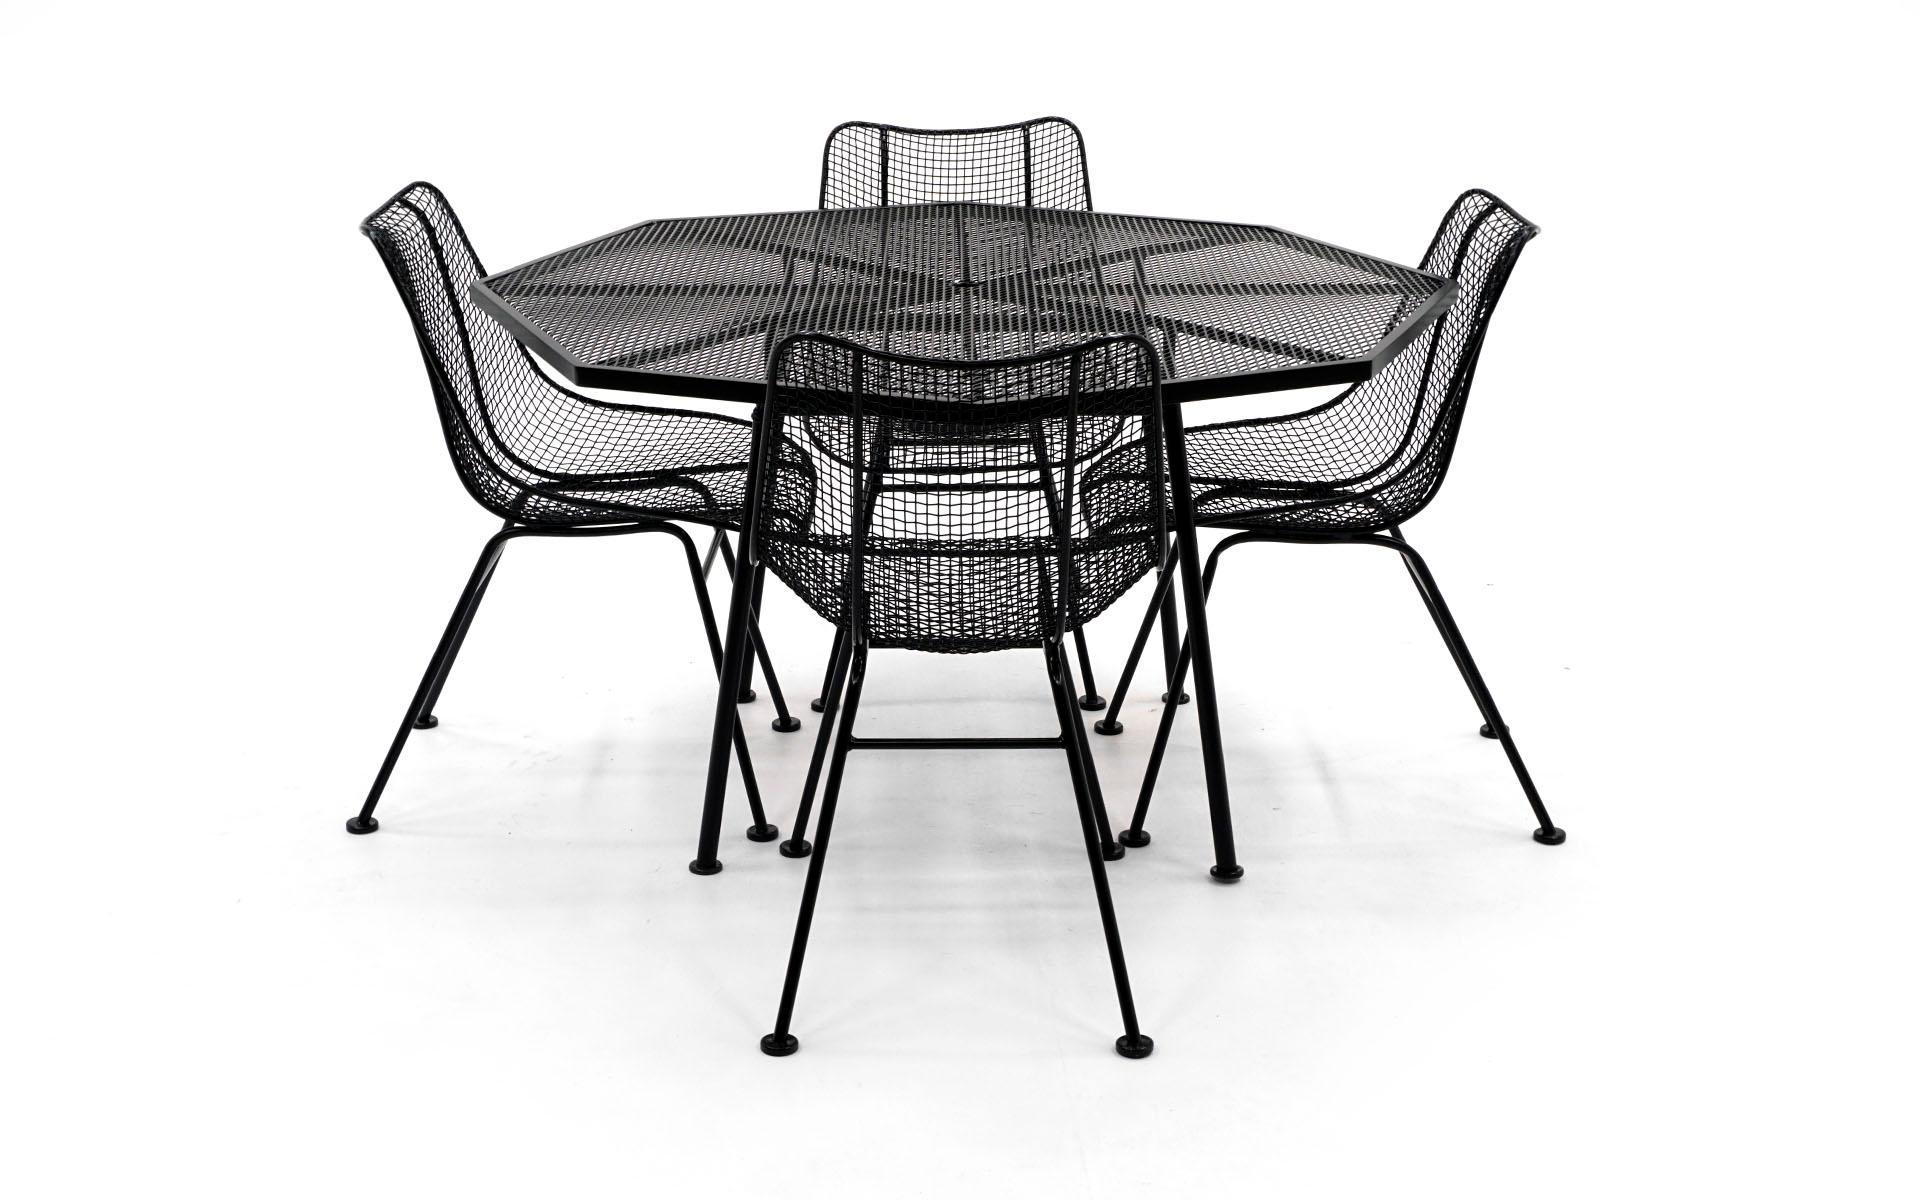 Russell Woodard patio table with 4 chairs. Woven wire sculptura chairs and octagonal table. All have been professionally / expertly media blasted and powder coated in a satin black finish. There is not a scratch on this set. Never outdoors since